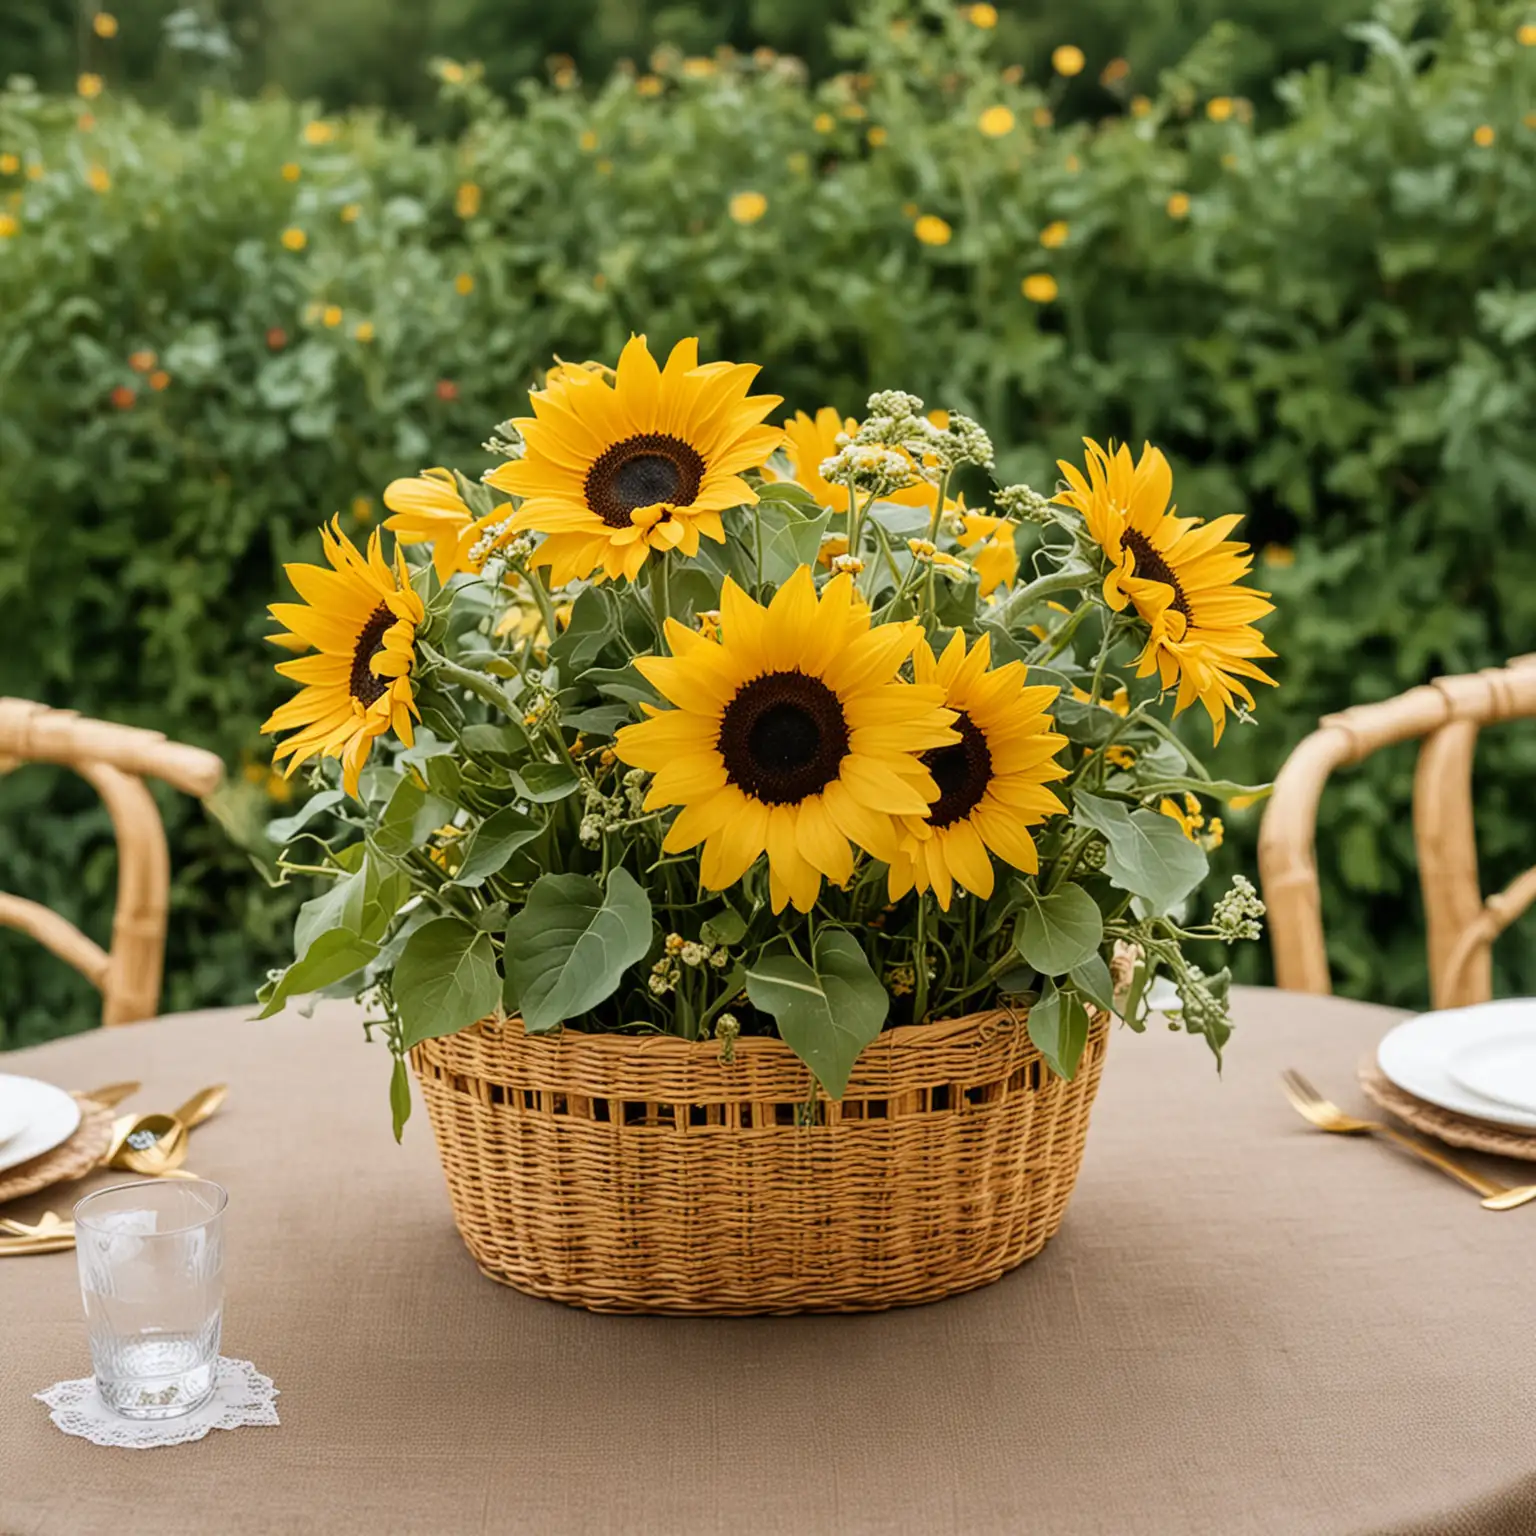 simple wedding centerpiece for garden party theme with a small yellow wicker basket holding sunflowers and cheerful garden flowers